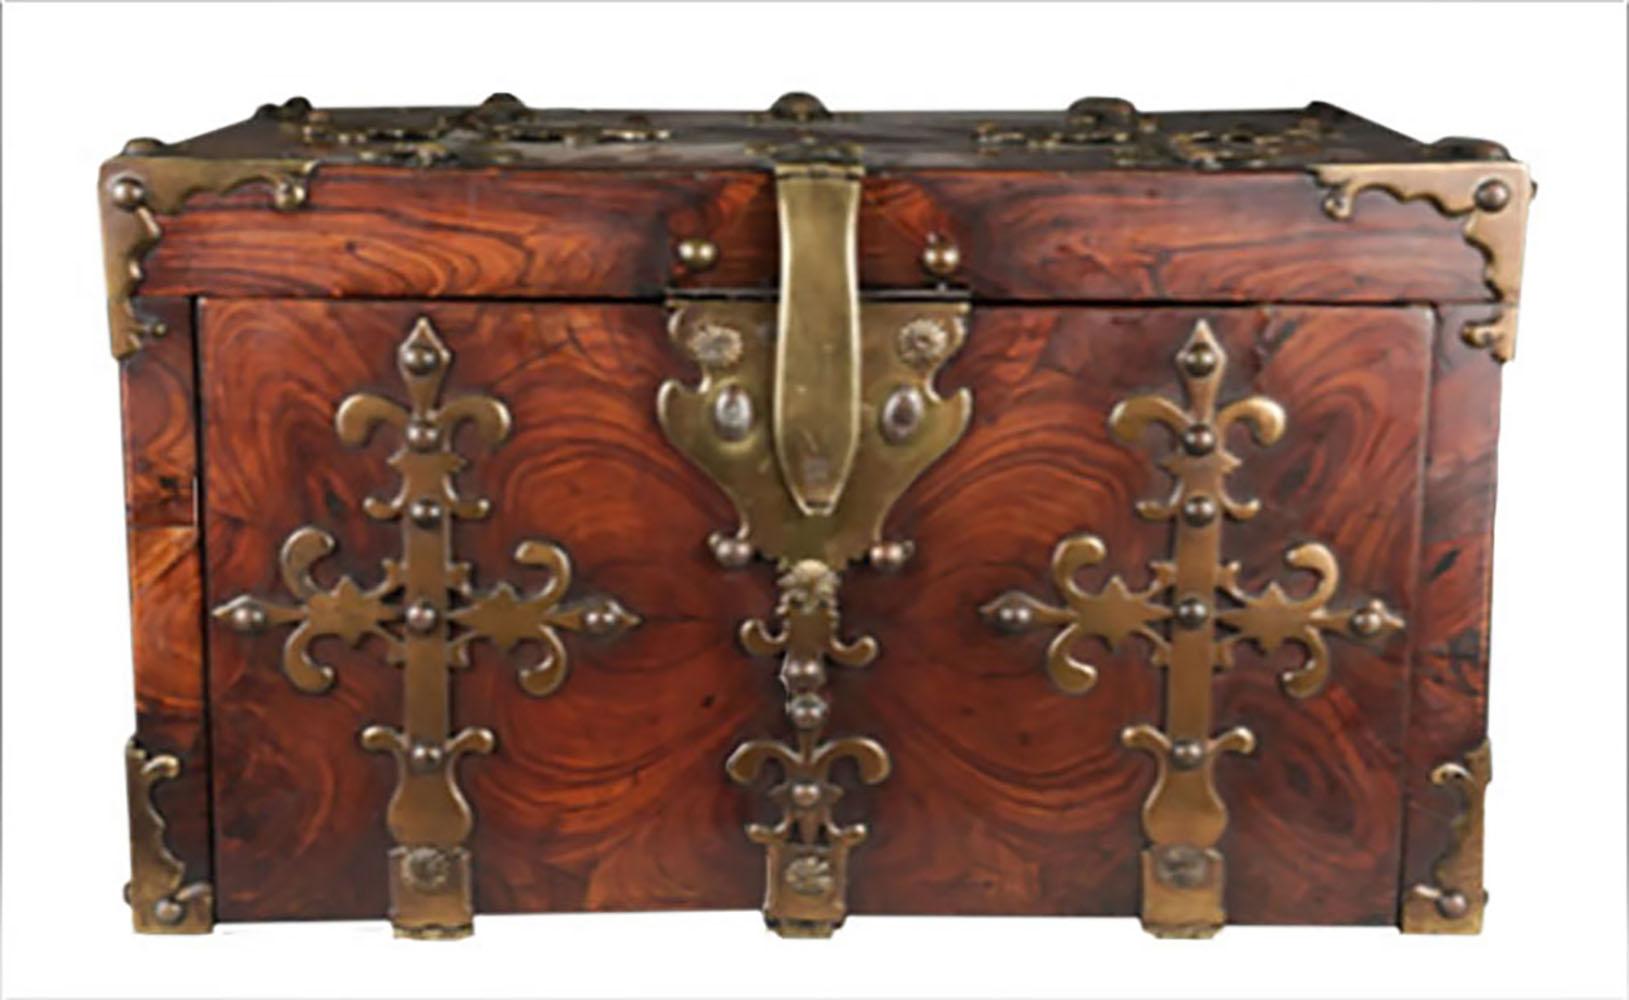 A Louis XVI kingwood small chest with brass mounts. Opens to a metal lined interior and two velvet working lower drawers. Circa 1700, France.